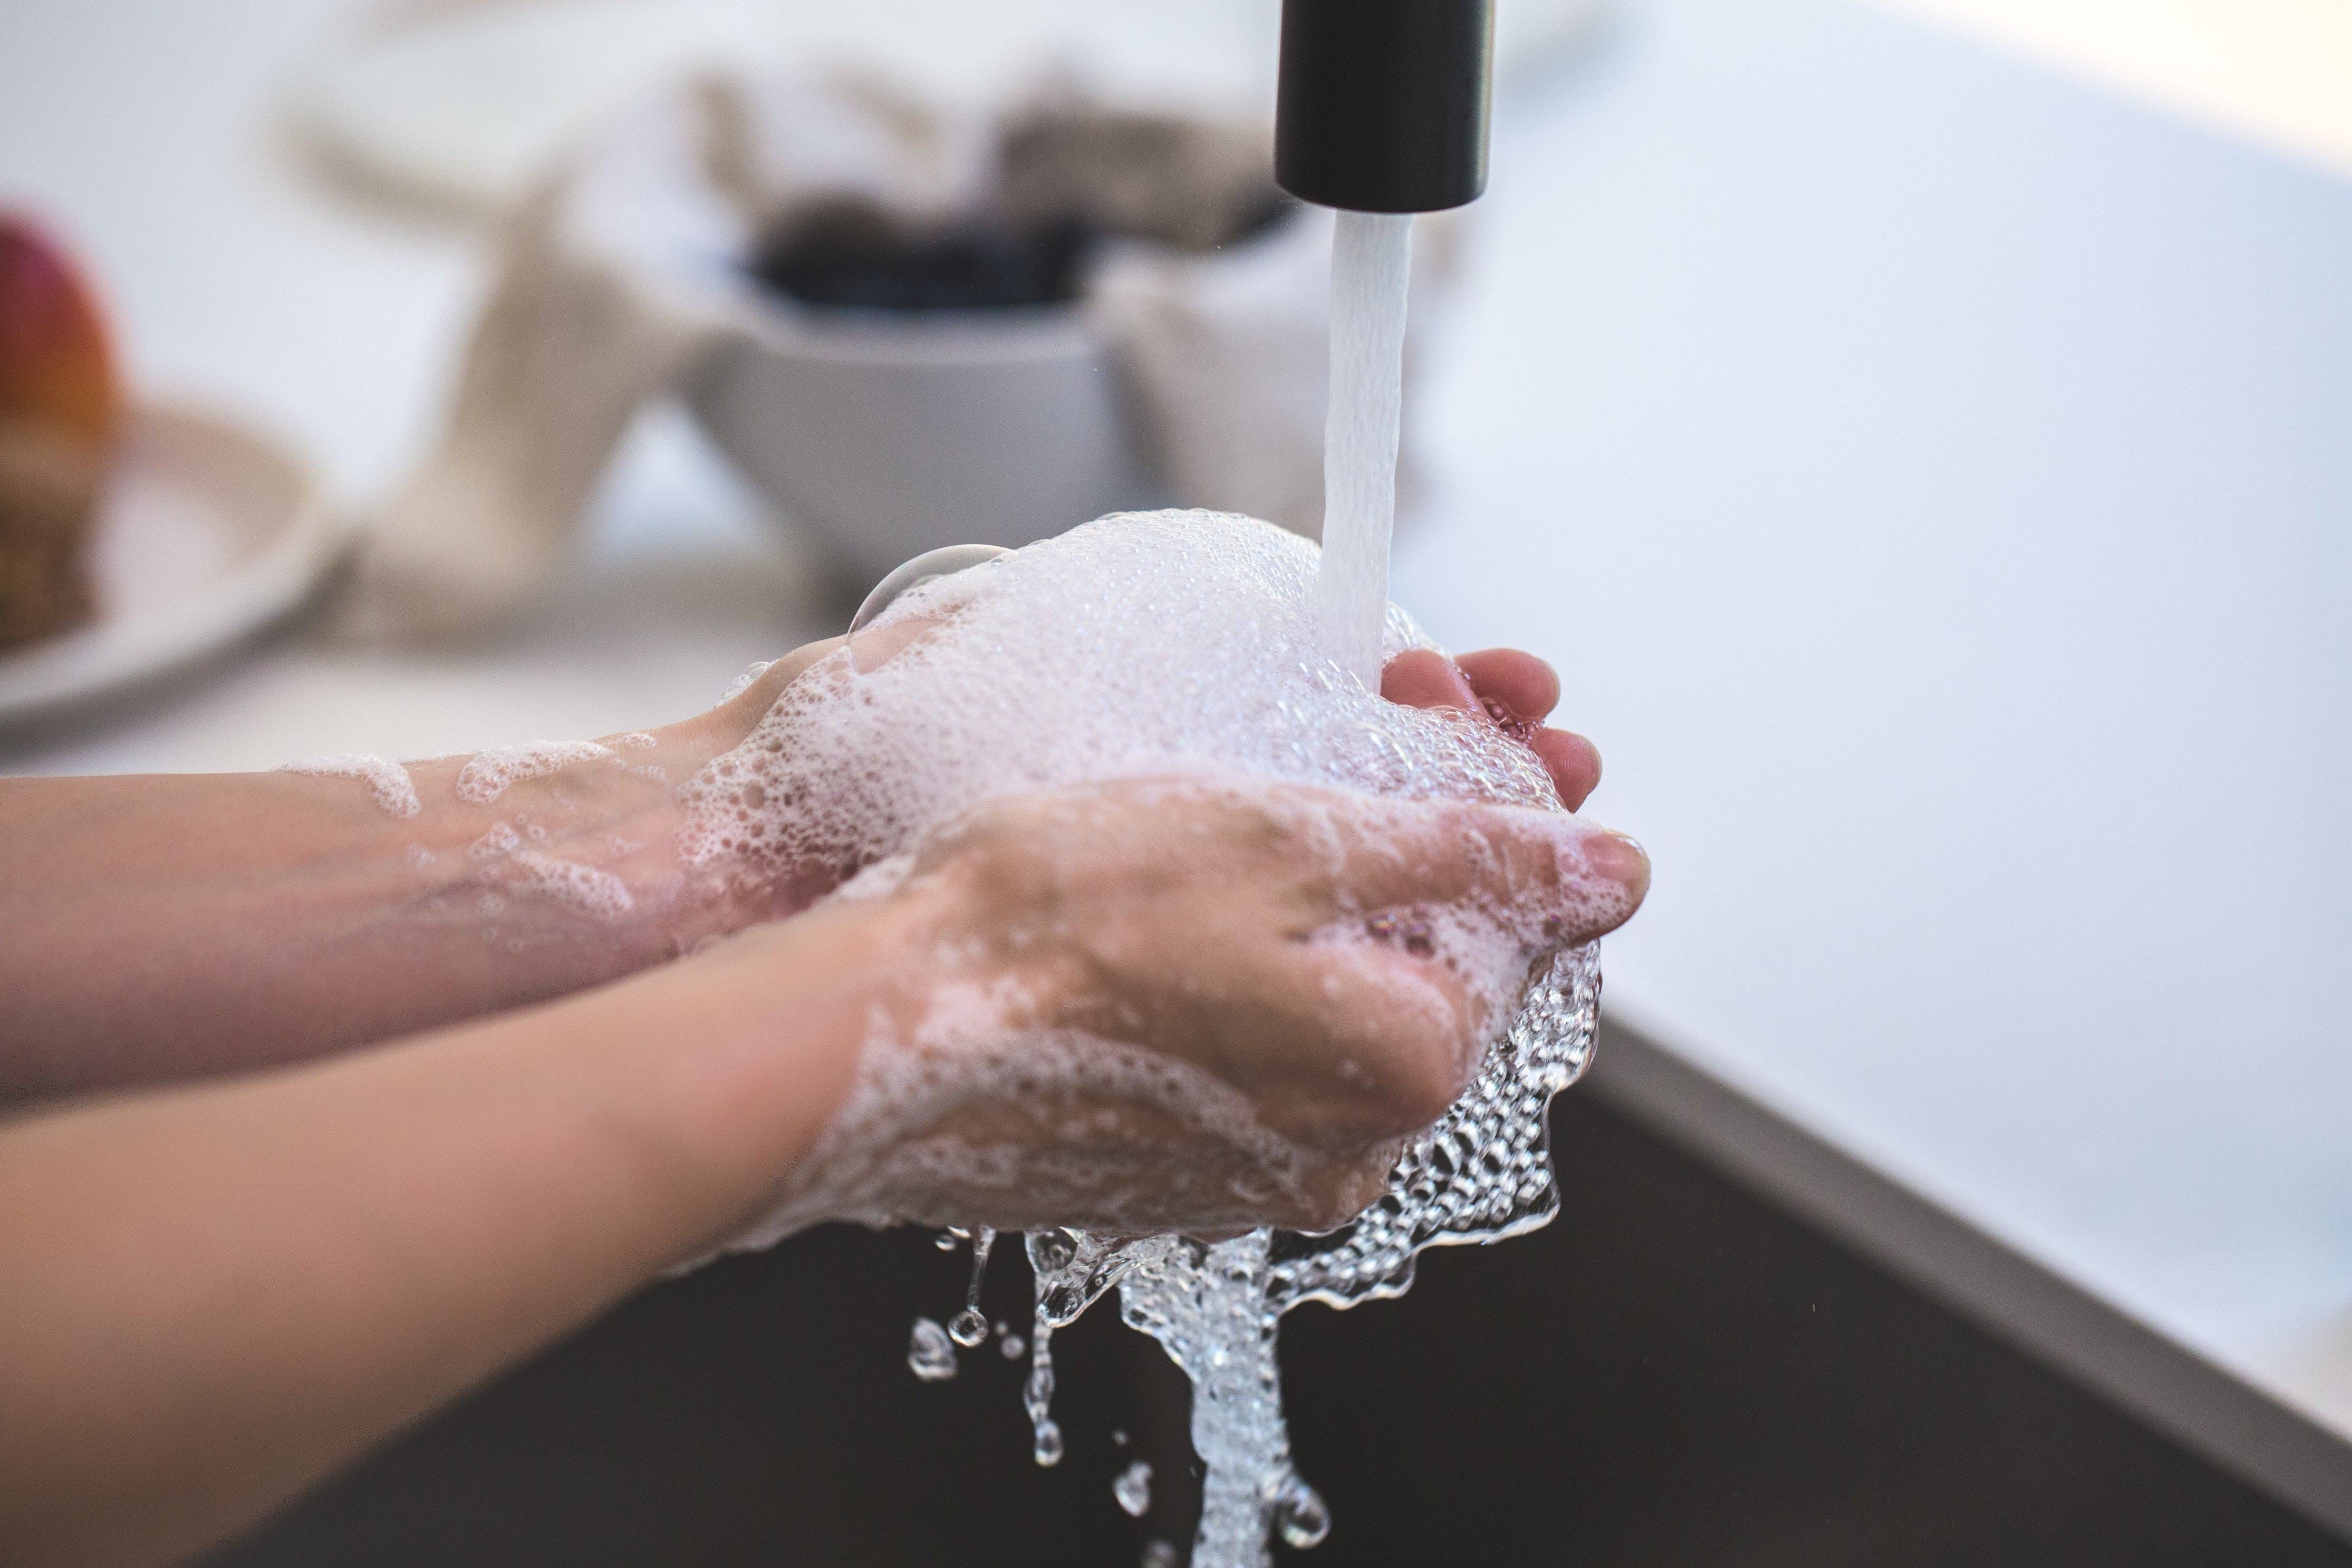 Wash your hands properly with soap or sanitize them time to time.